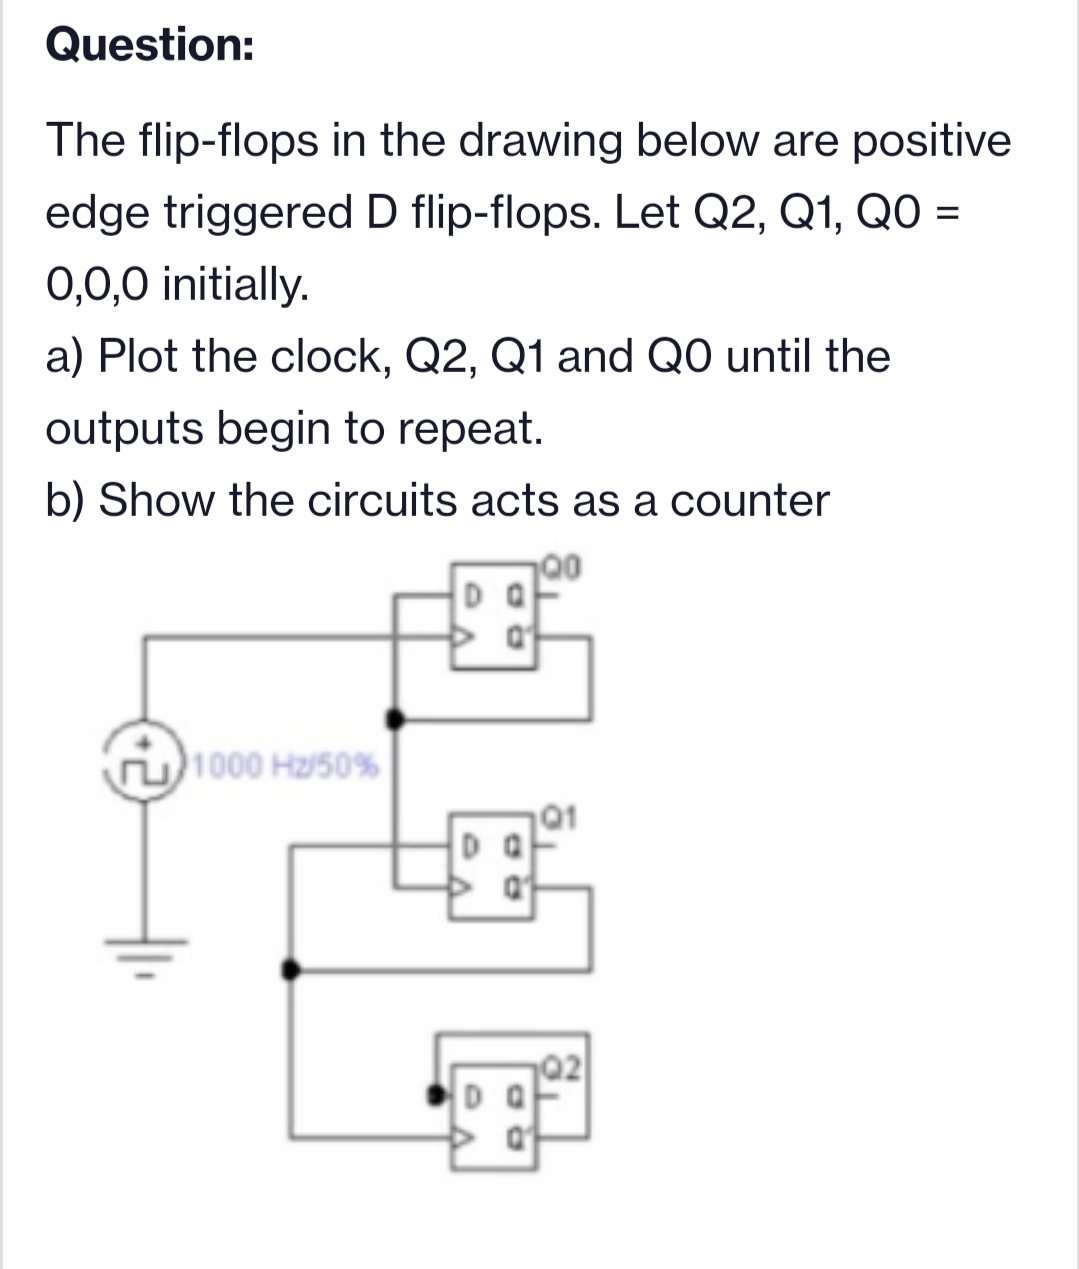 Question:
The flip-flops in the drawing below are positive
edge triggered D flip-flops. Let Q2, Q1, QO =
0,0,0 initially.
a) Plot the clock, Q2, Q1 and QO until the
outputs begin to repeat.
b) Show the circuits acts as a counter
00
1000 Hz/50%
